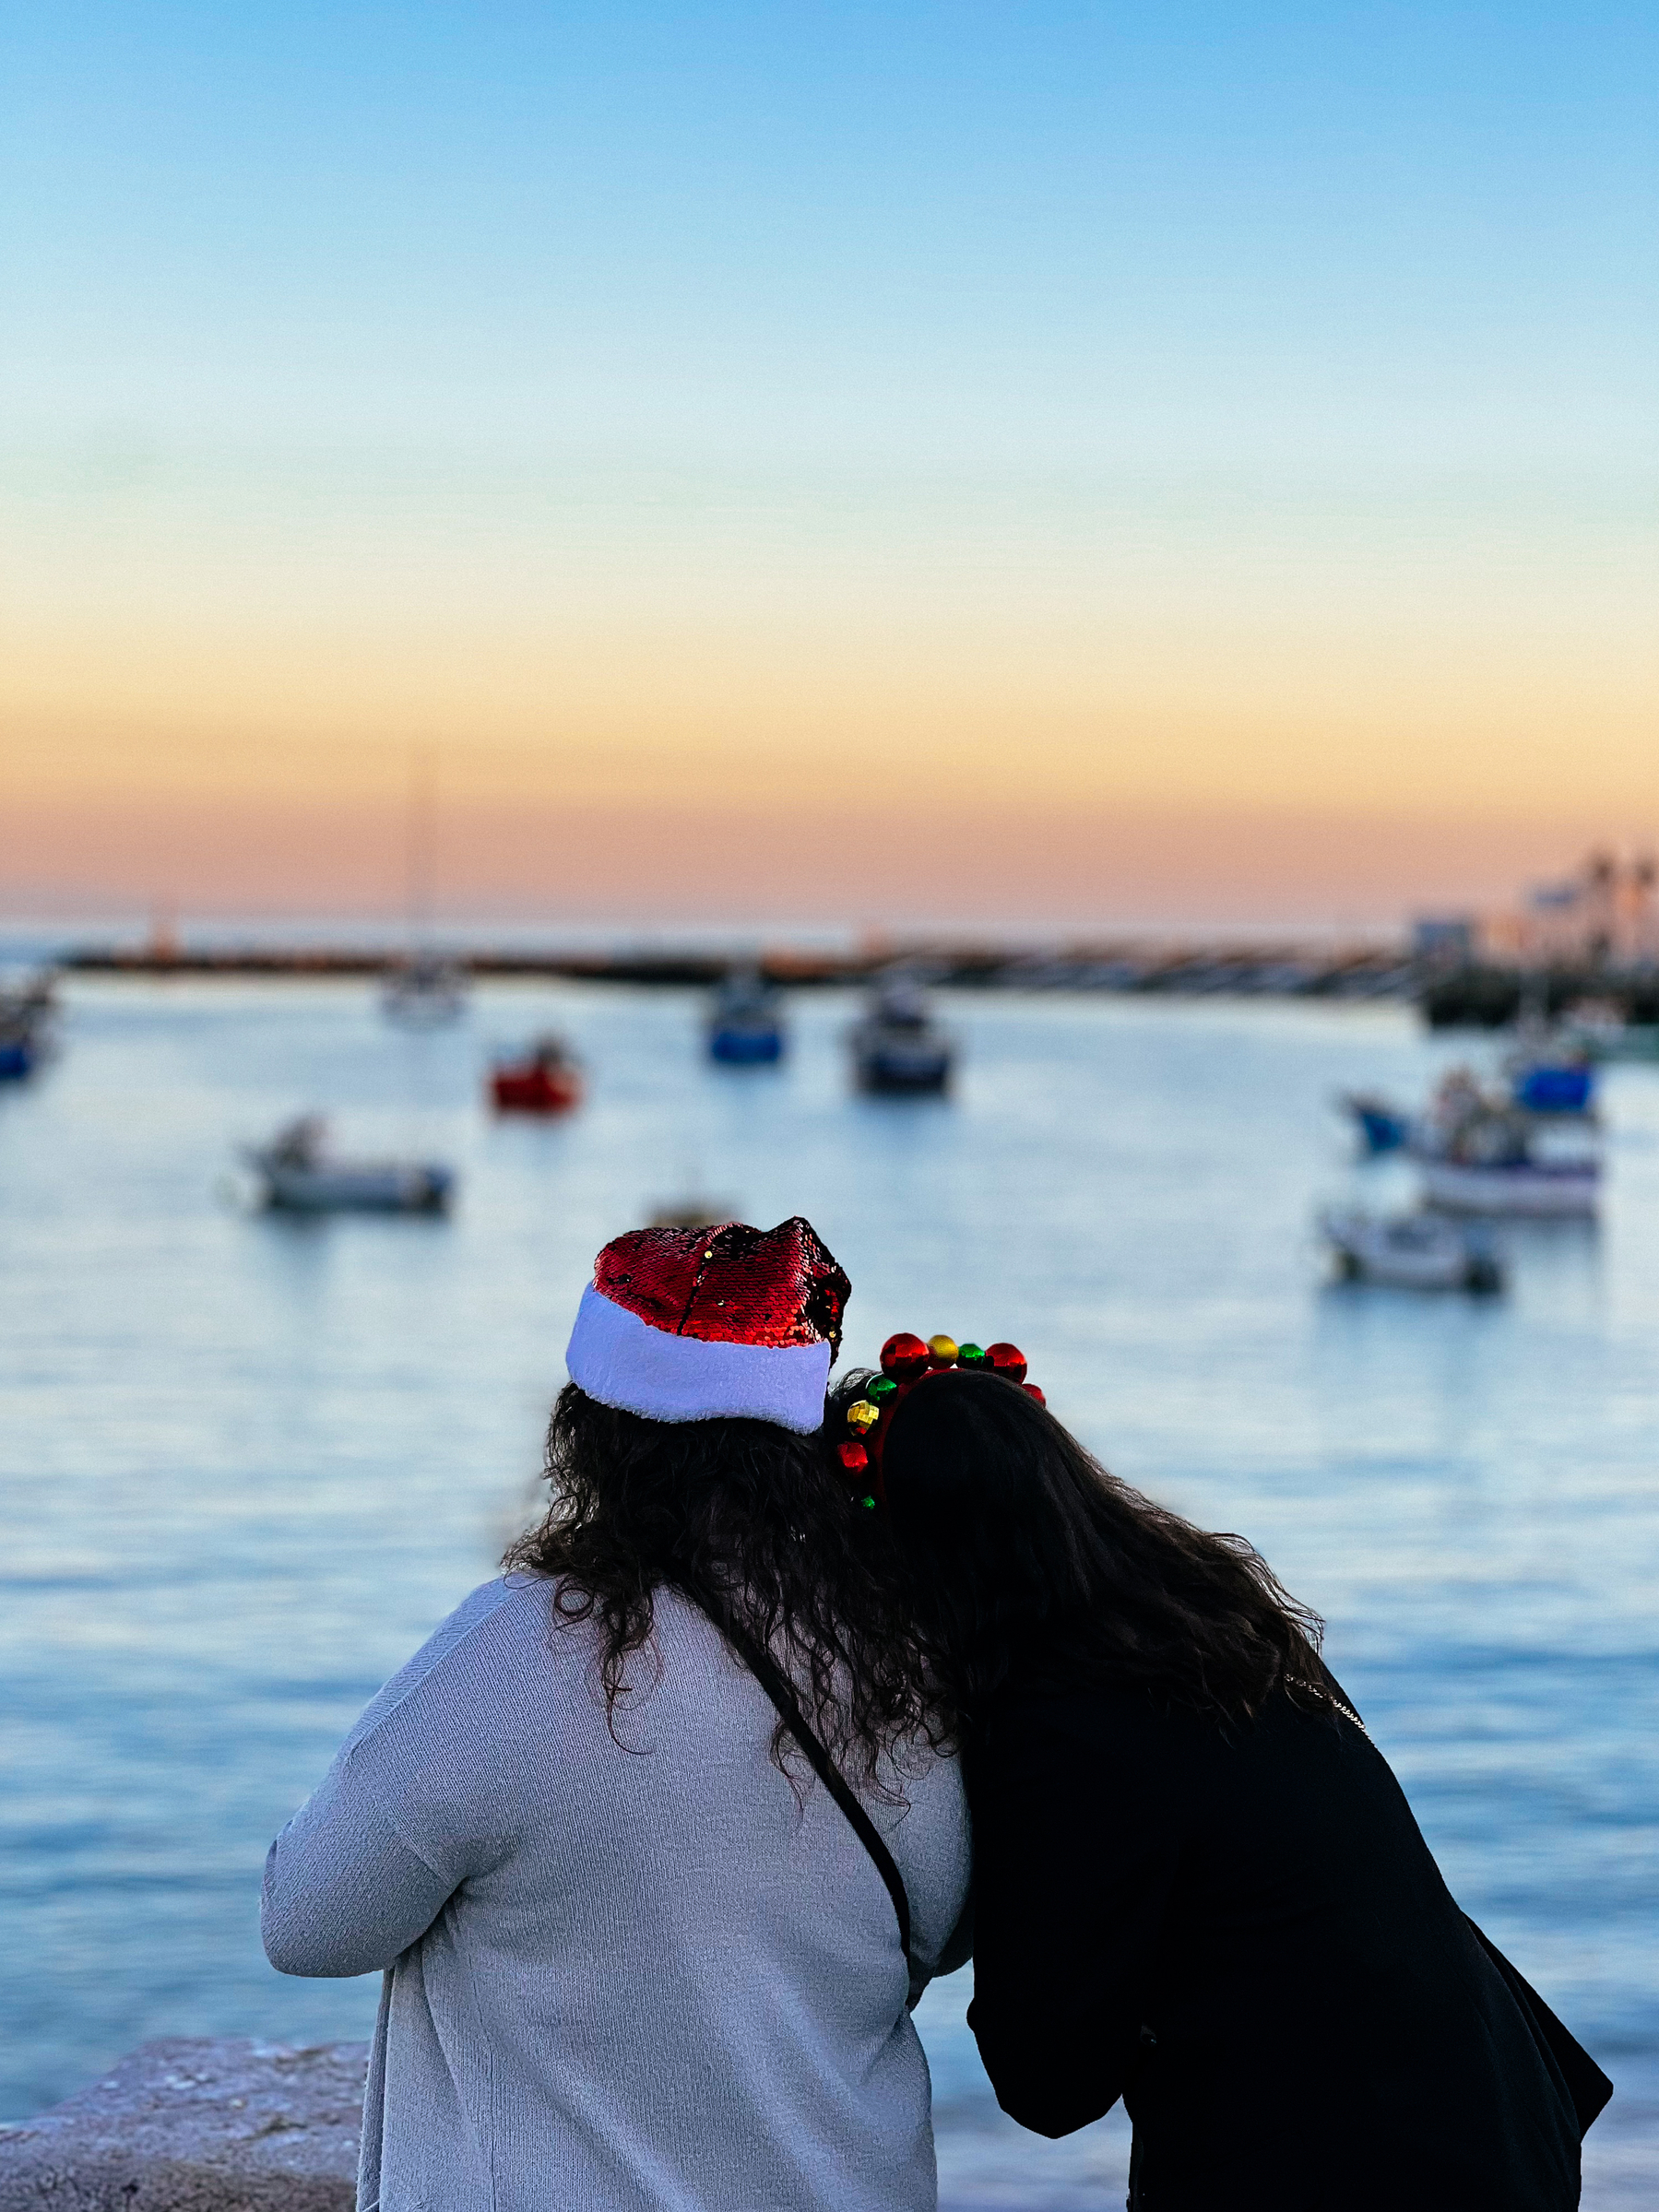 Two individuals wearing festive holiday headwear looking out at a harbor with boats during sunset.